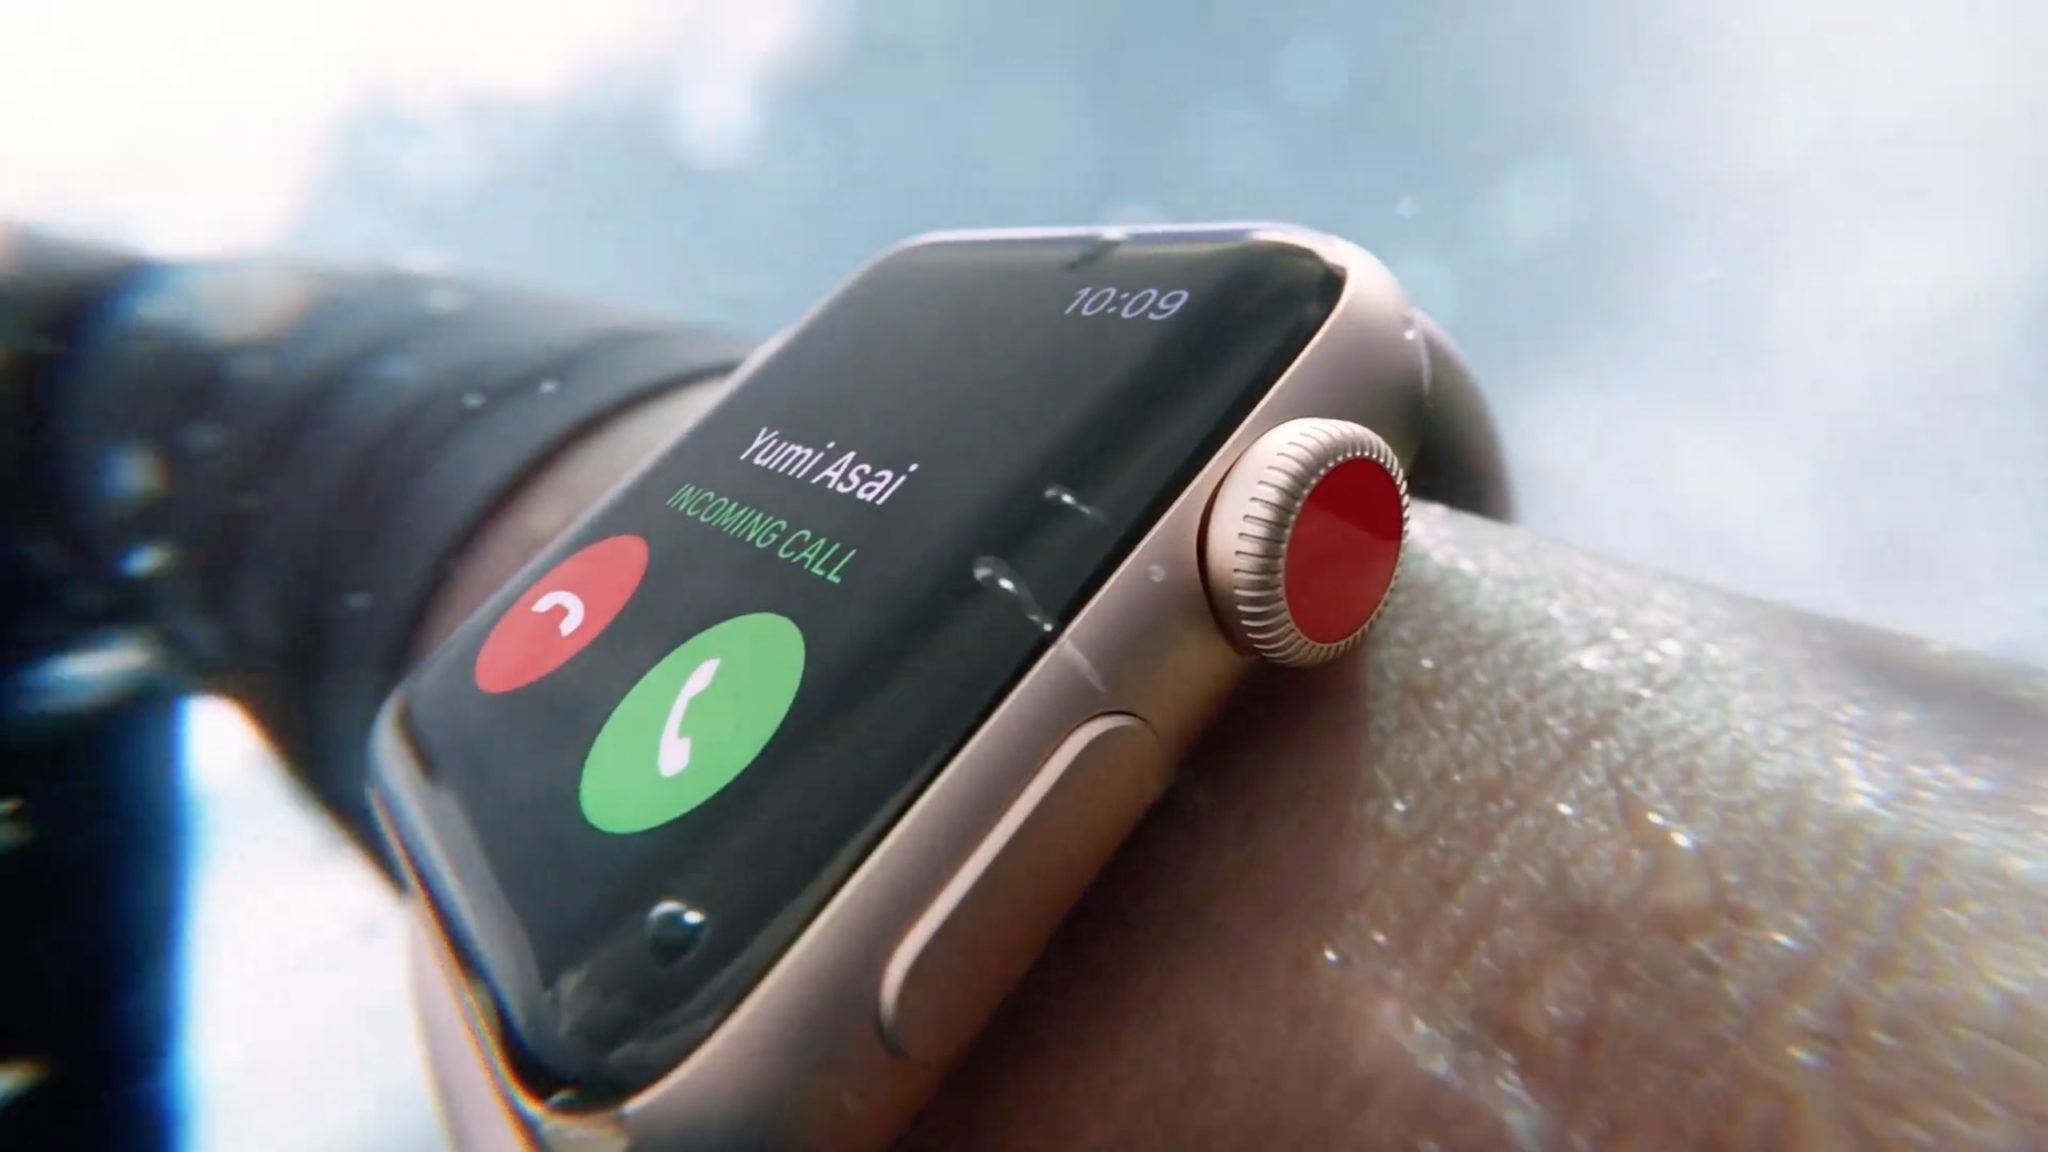 Apple Watch Series 3 incoming call 001